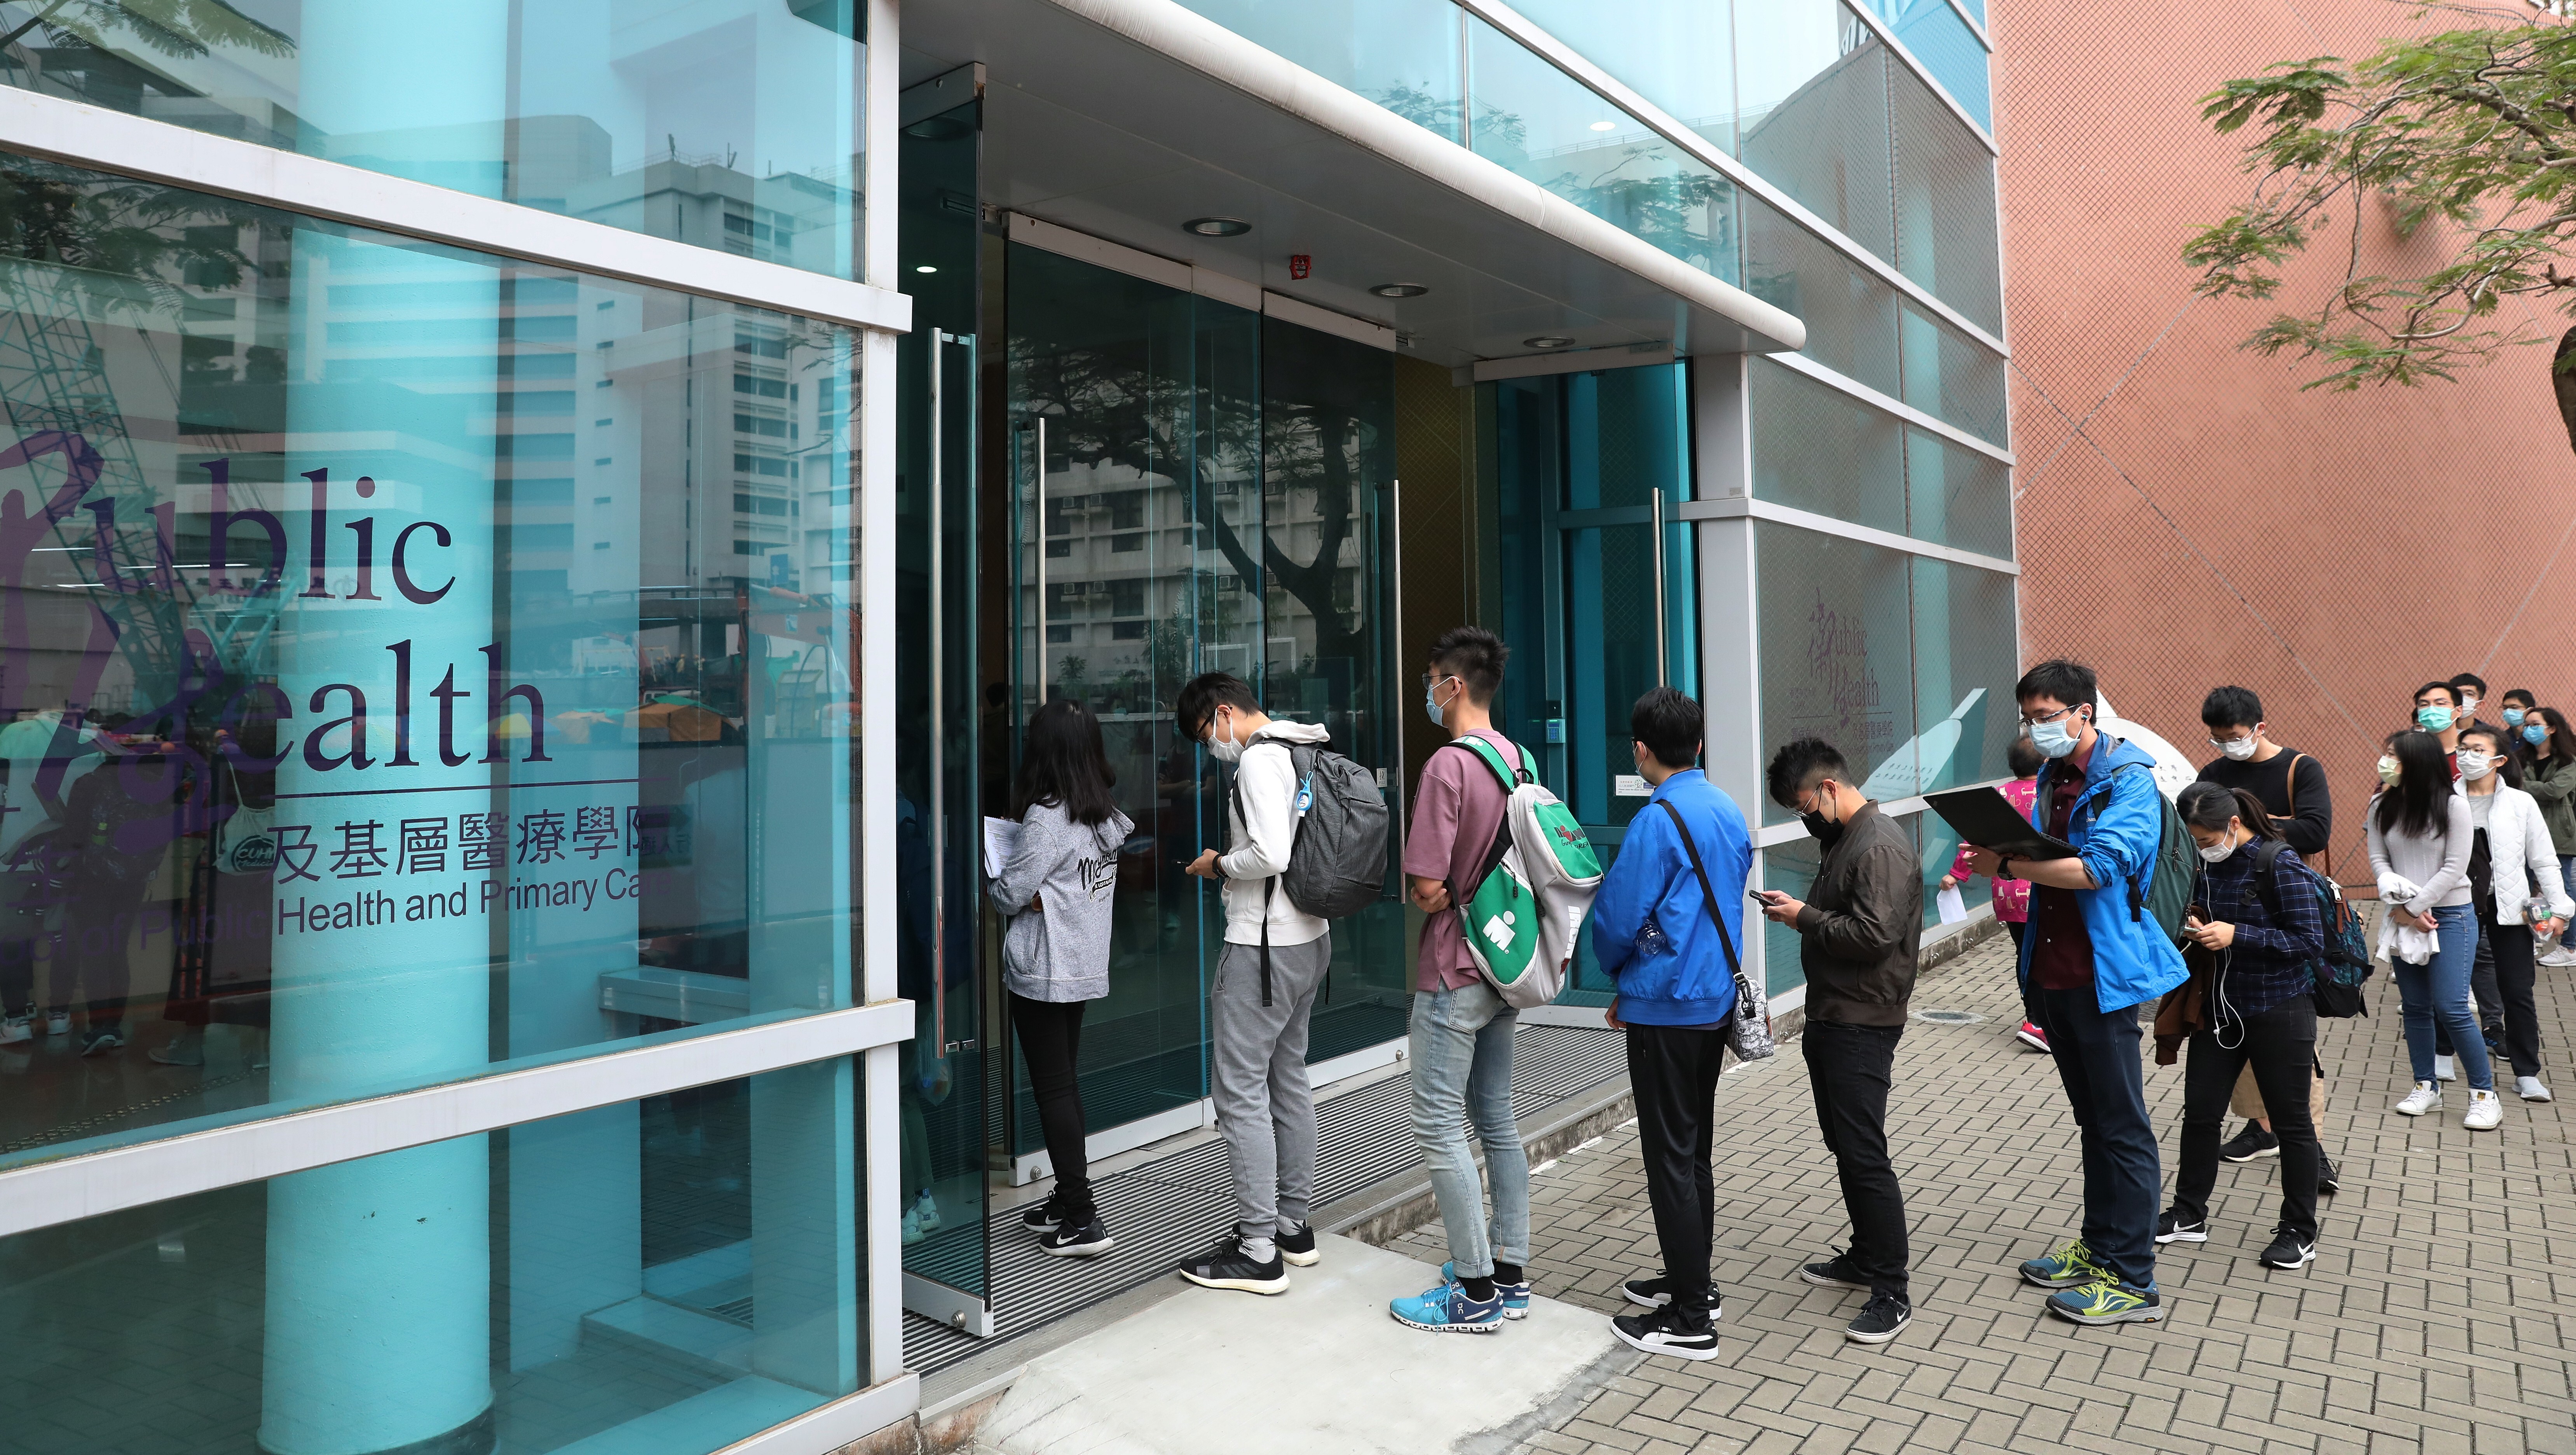 Chinese University of Hong Kong students queue to have their temperature checked before sitting an exam at their campus in Sha Tin on April 3. Class disruptions have greatly affected campus life since last September. Photo: Nora Tam